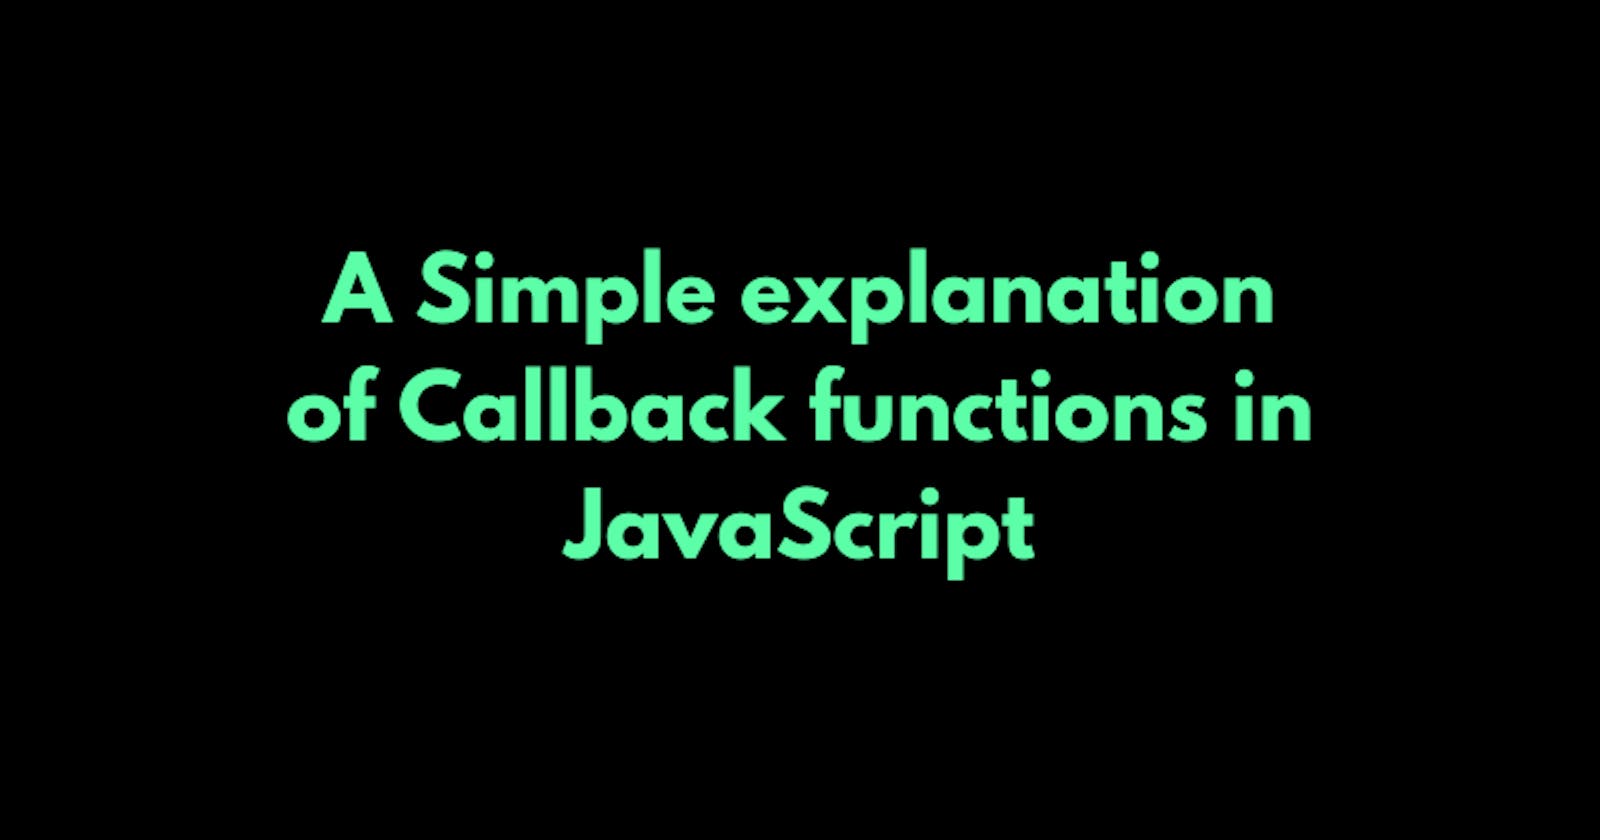 A simple explanation of Callback functions in JavaScript